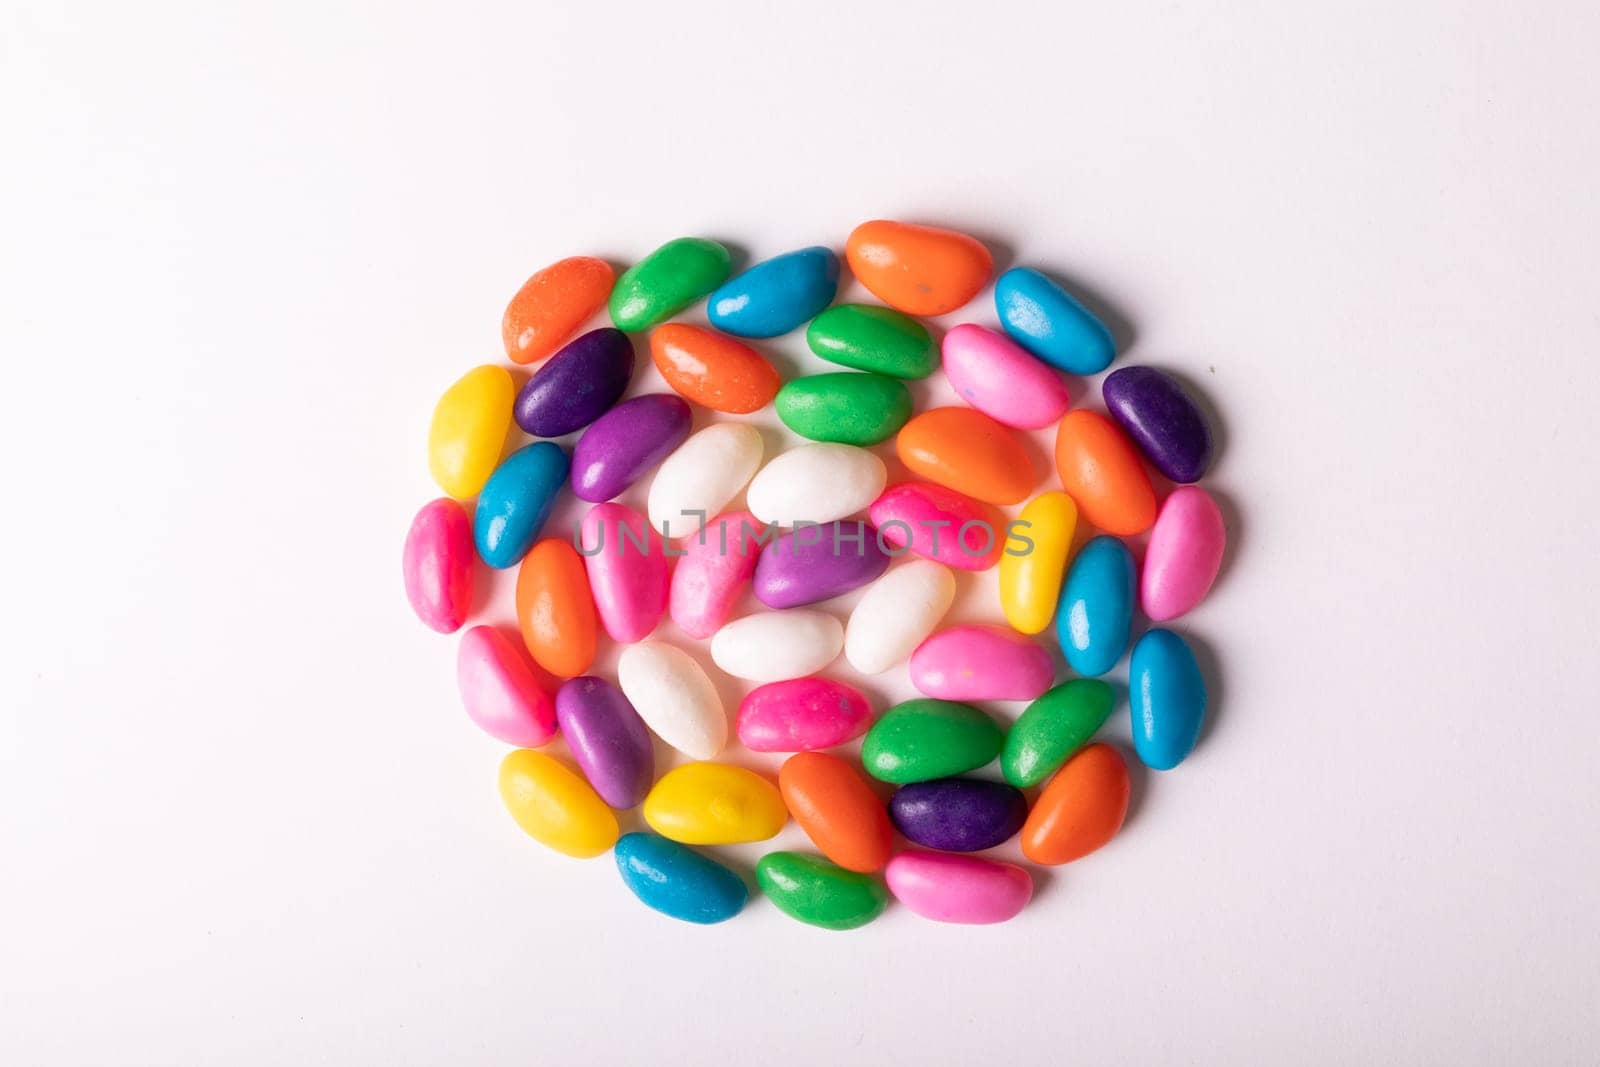 Overhead view of multi colored candies arranged in circle over white background with copy space by Wavebreakmedia